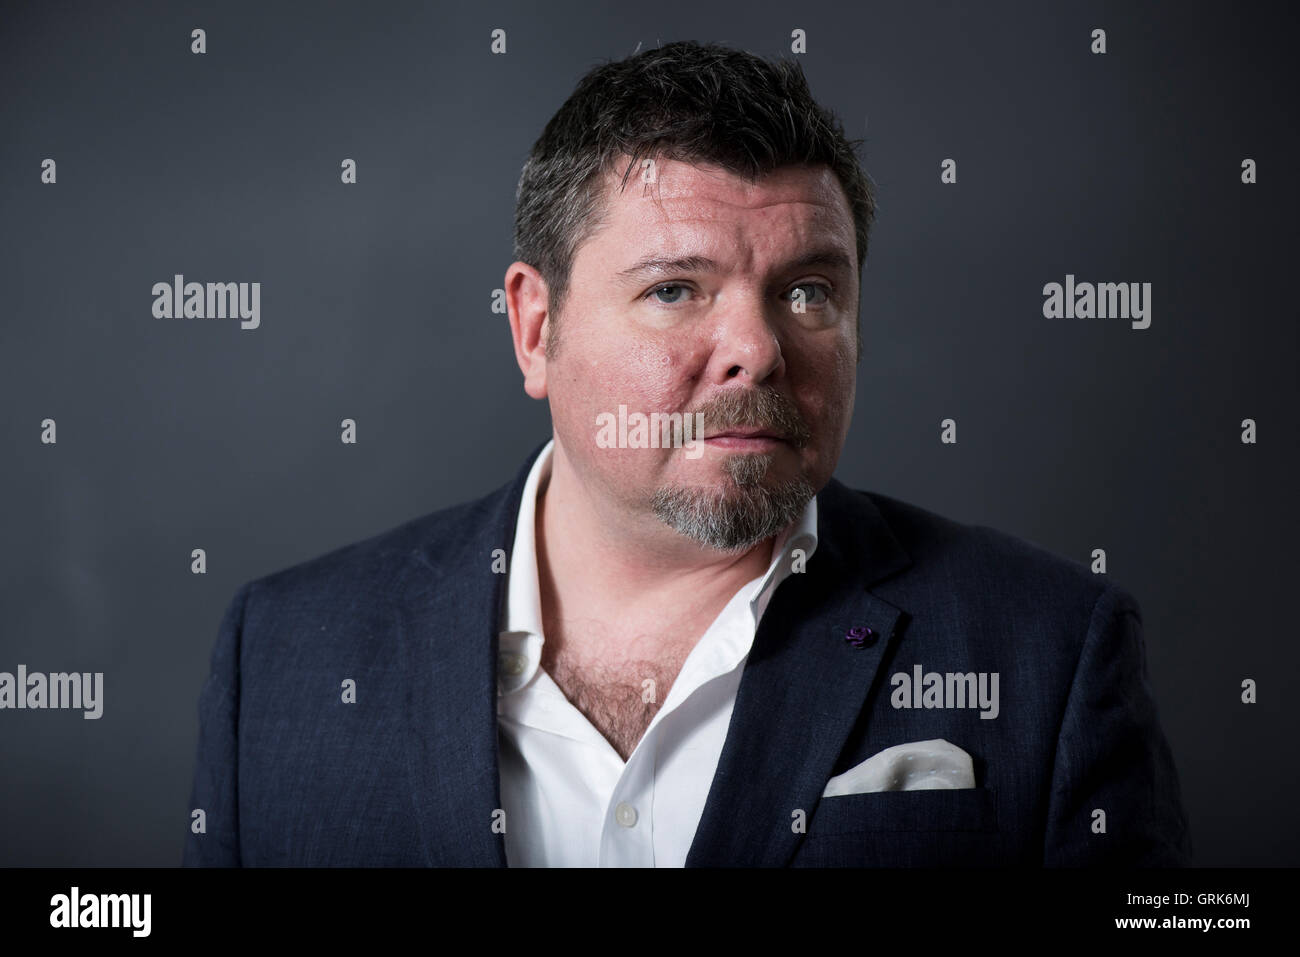 Investigative journalist, newspaper executive, non-fiction author, radio broadcaster and film-maker Neil Mackay. Stock Photo